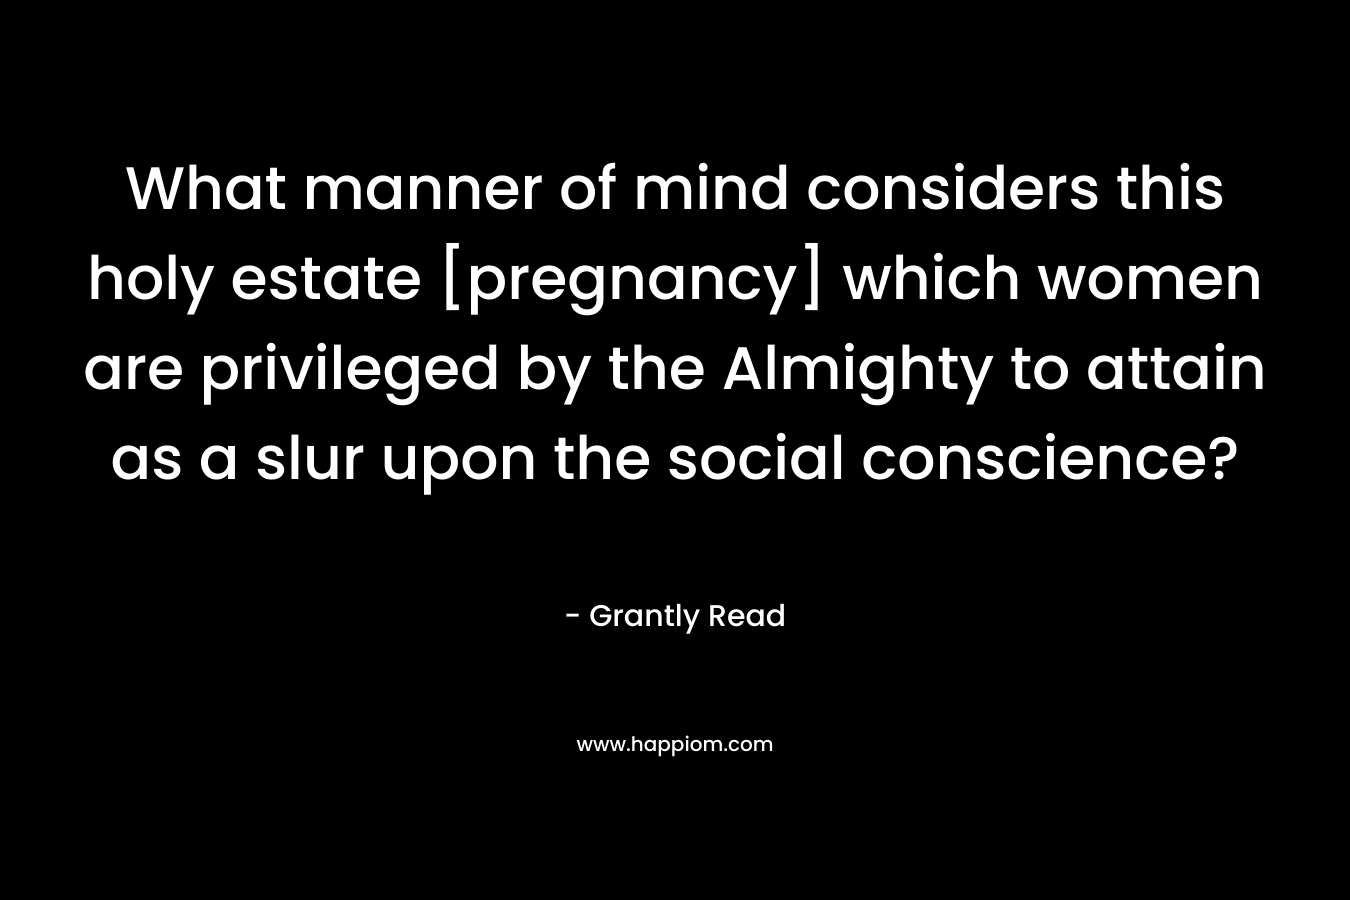 What manner of mind considers this holy estate [pregnancy] which women are privileged by the Almighty to attain as a slur upon the social conscience? – Grantly Read